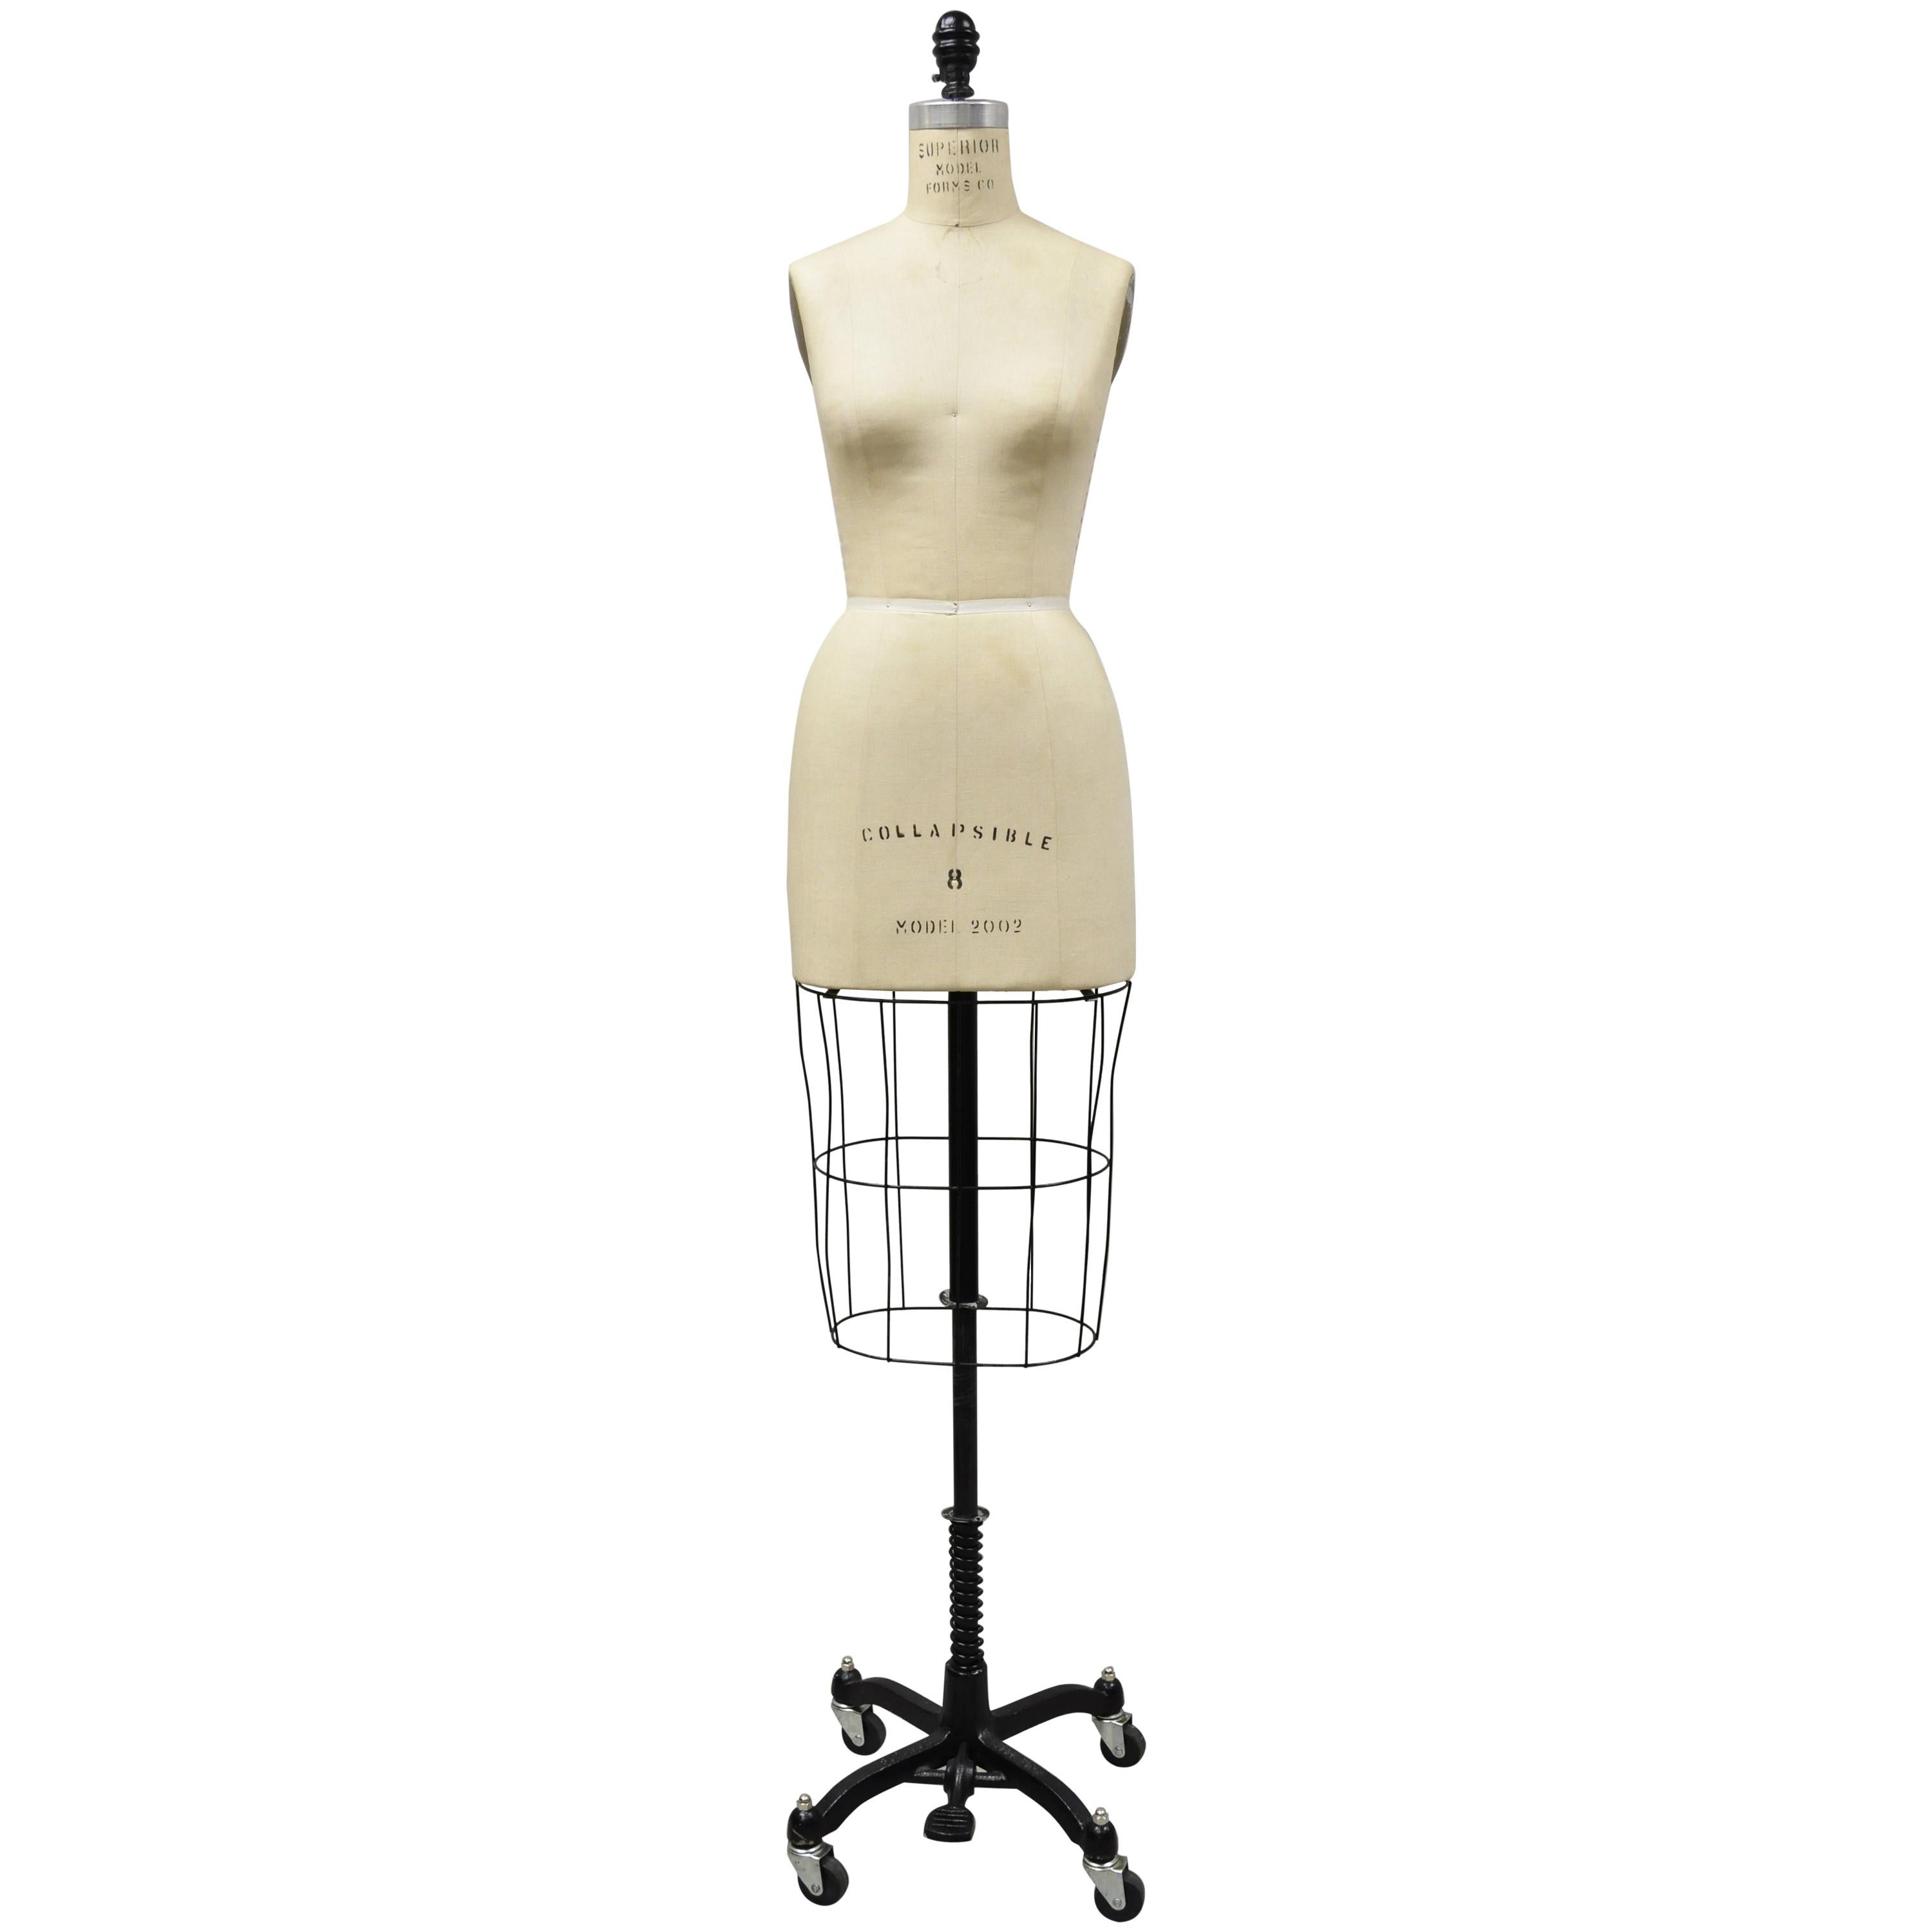 Superior Model Forms Co. Model 2002 Iron Cage Dress Form Mannequin